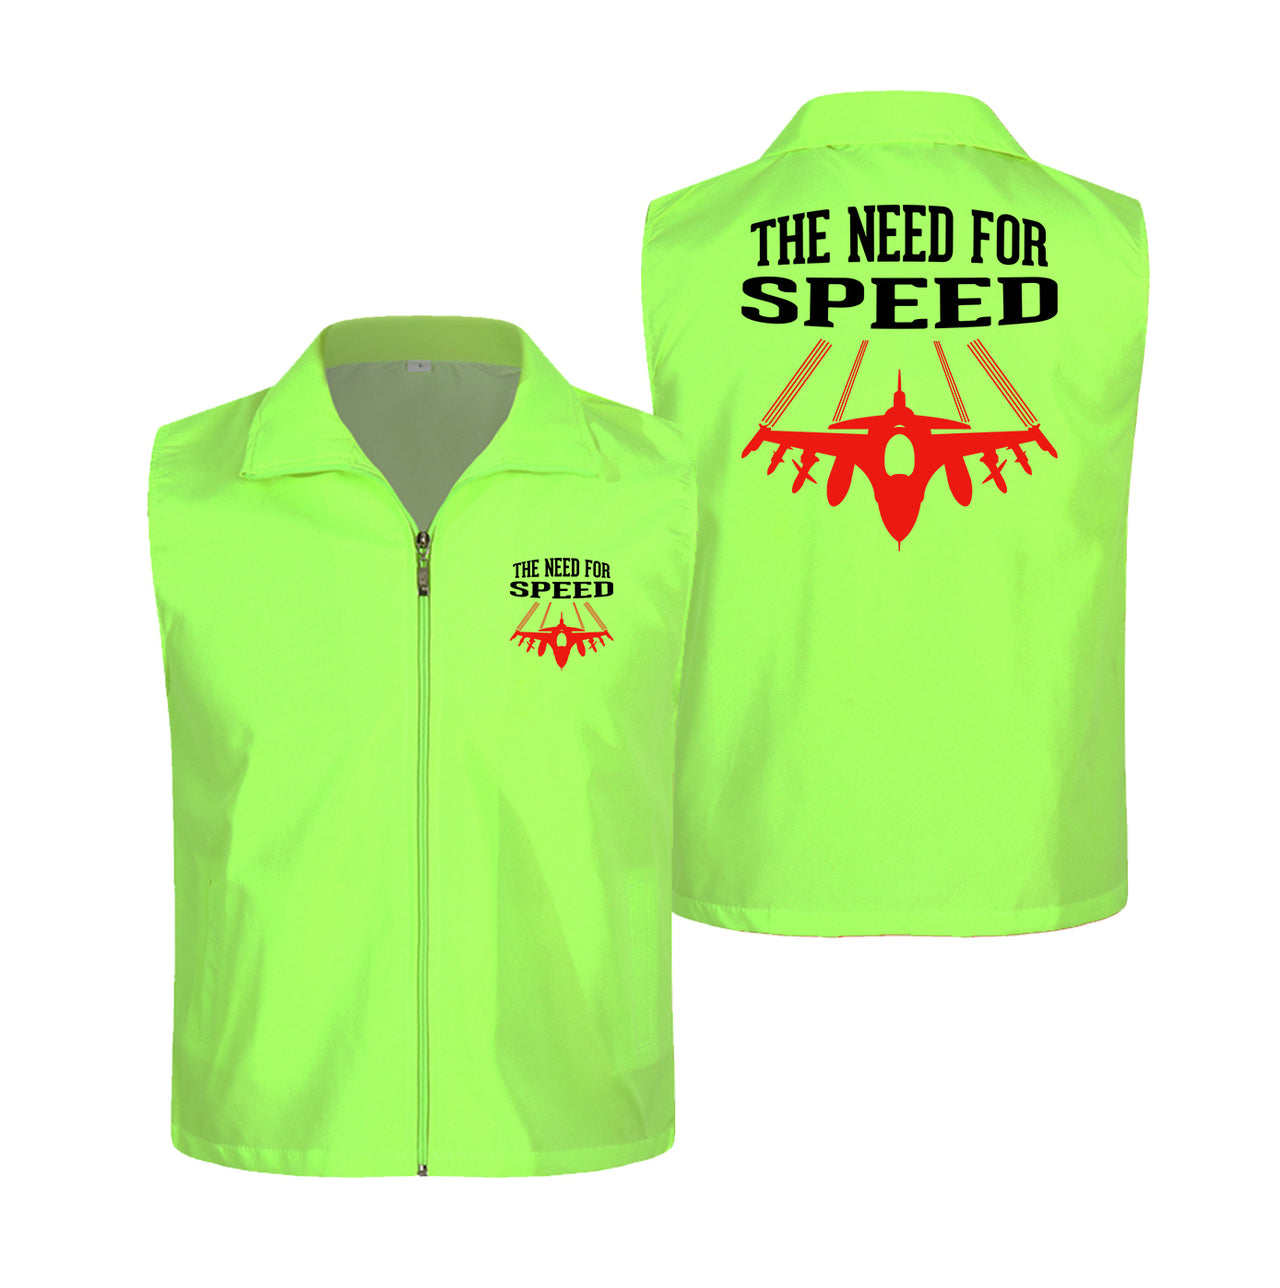 The Need For Speed Designed Thin Style Vests